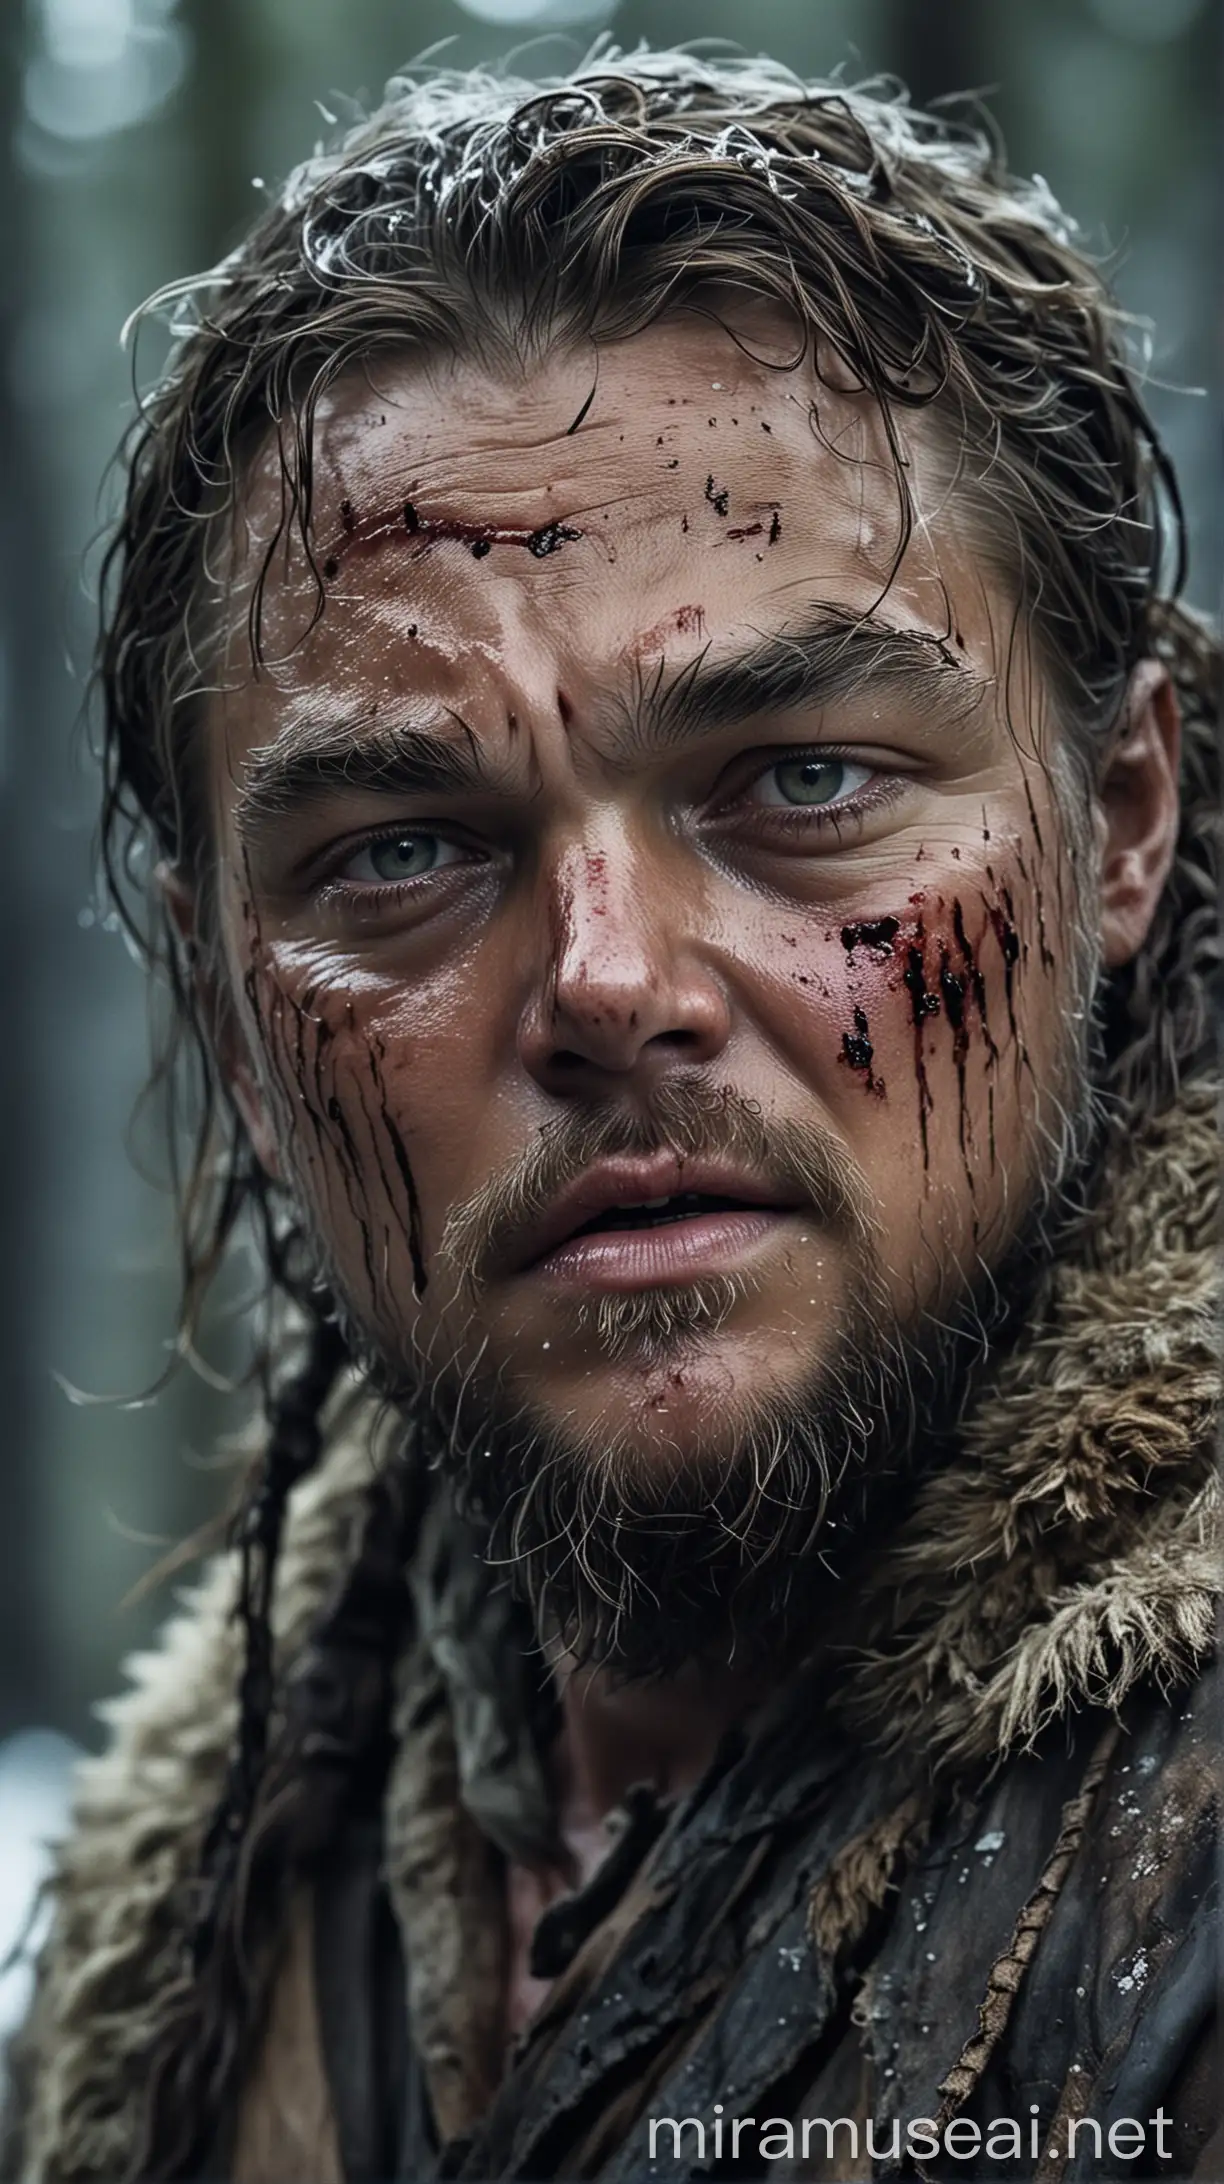 Leonardo DiCaprio as Hugh Glass Bloody and Battered in the Wilderness